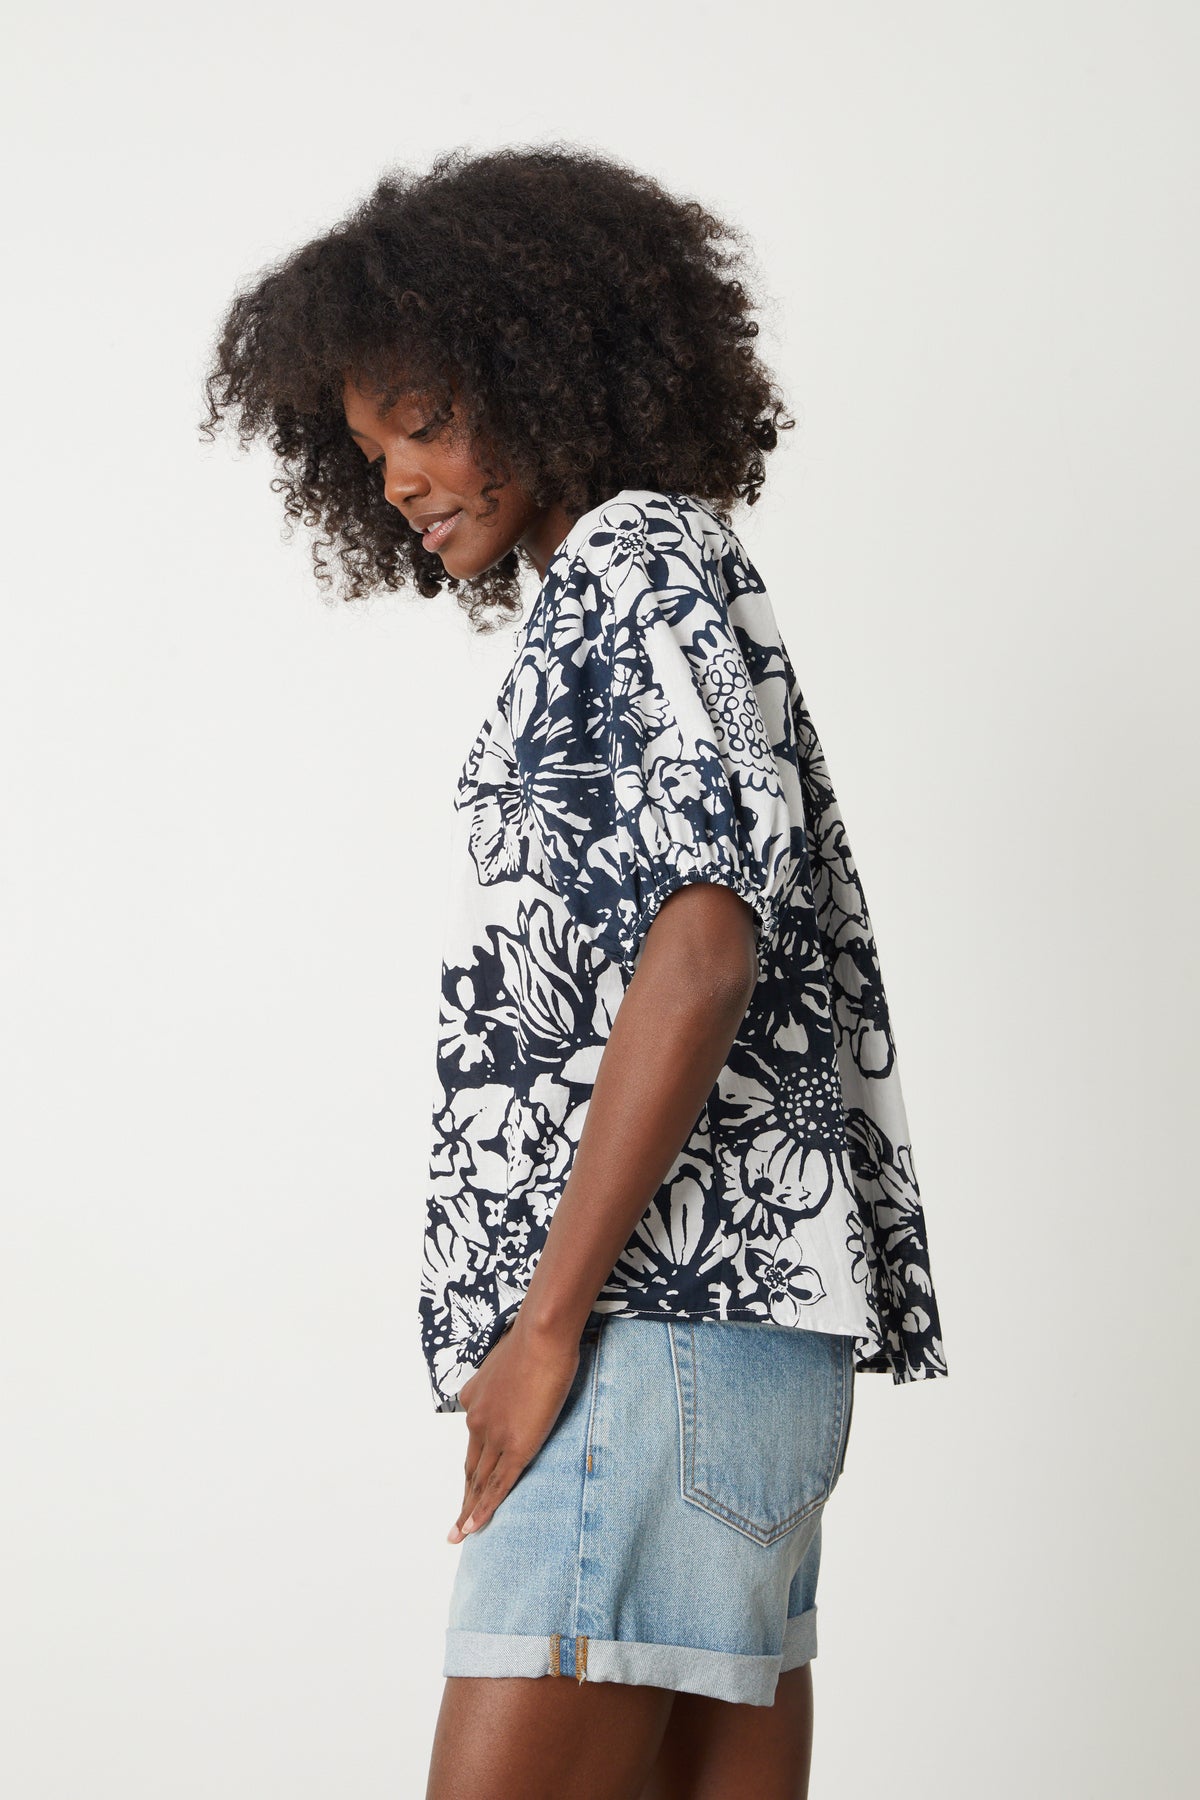   A woman wearing the Velvet by Graham & Spencer Angela Printed Boho Top and denim shorts. 